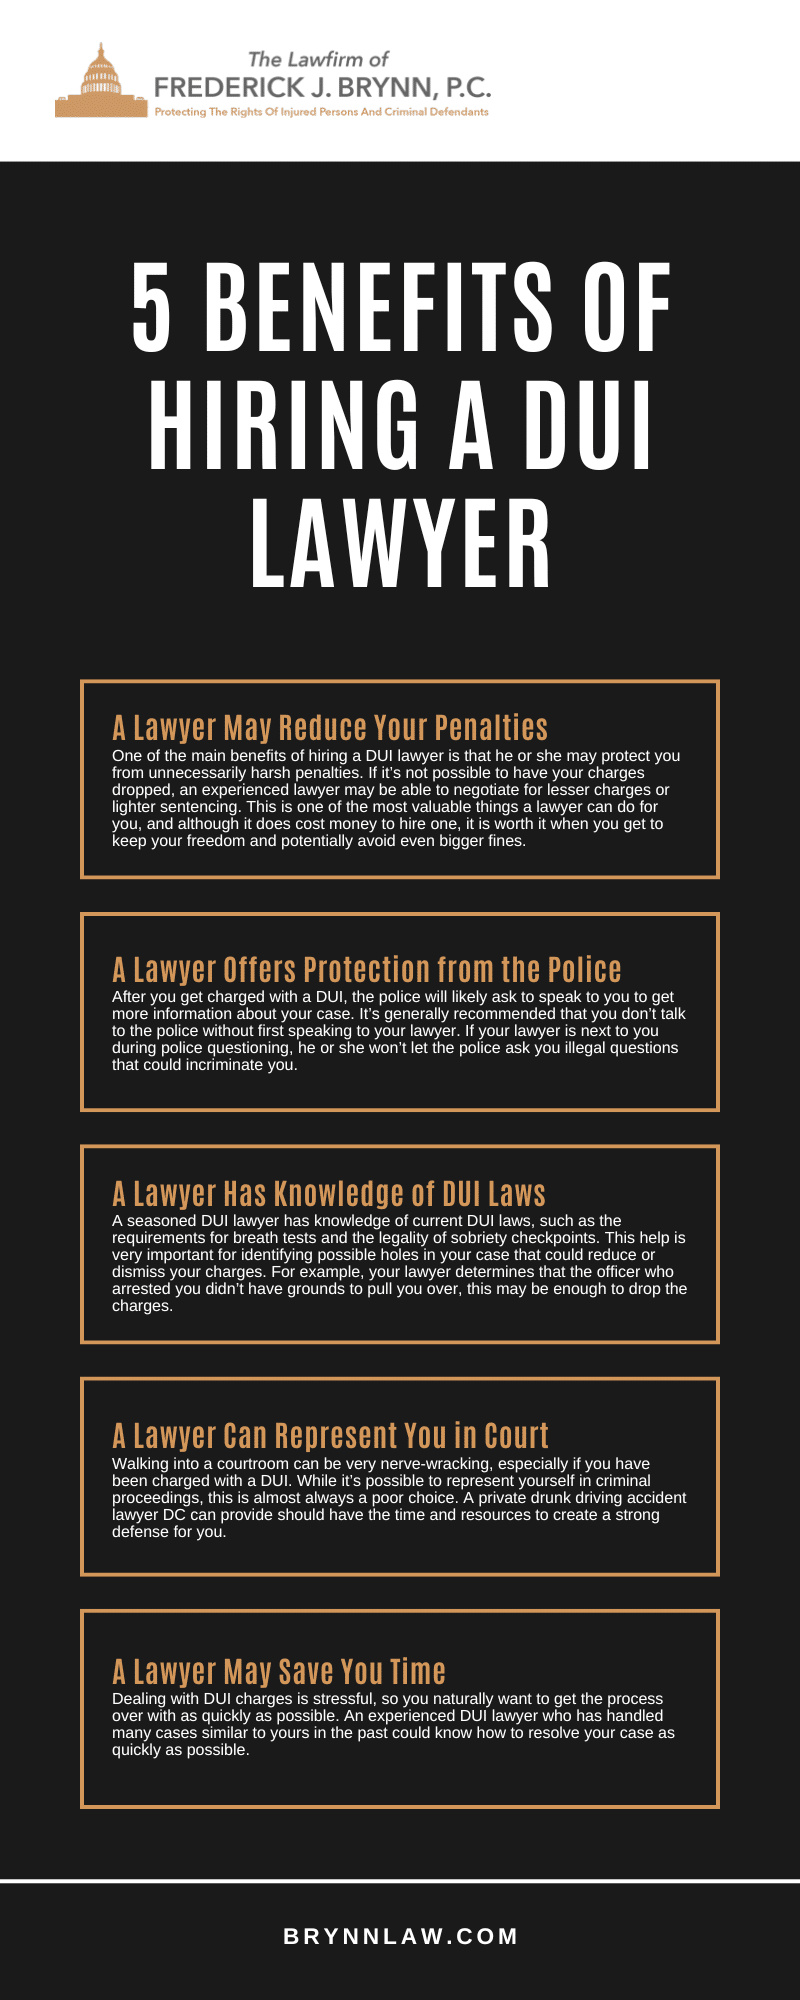 5 Benefits Of Hiring A DUI Lawyer Infographic